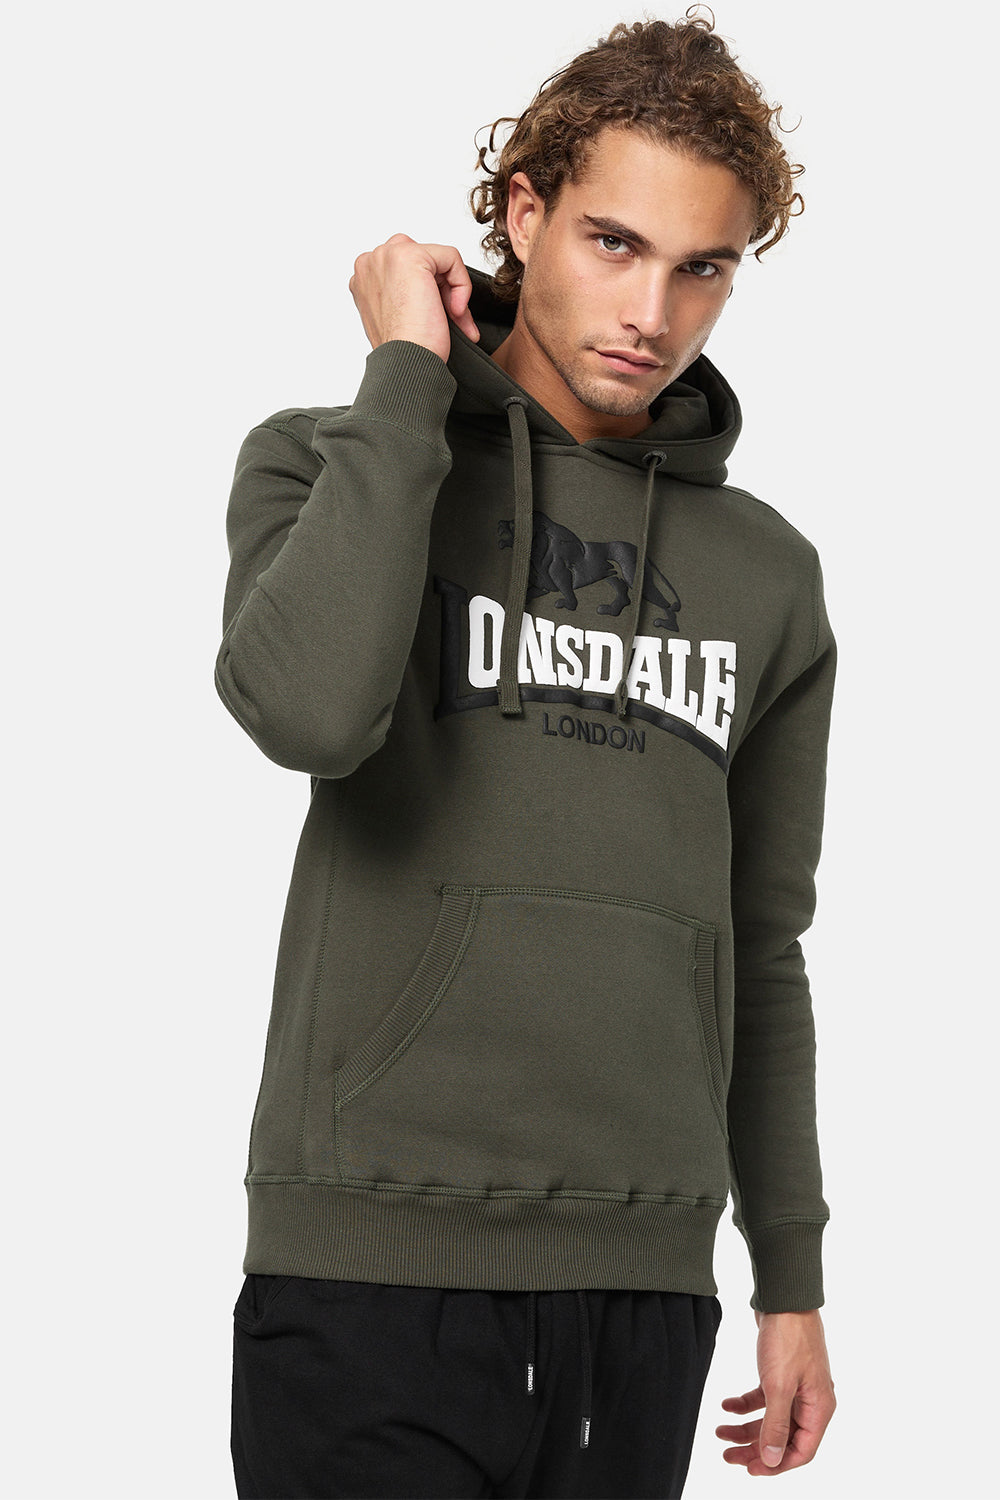 Lonsdale Thurning Hoodie Olive Black White